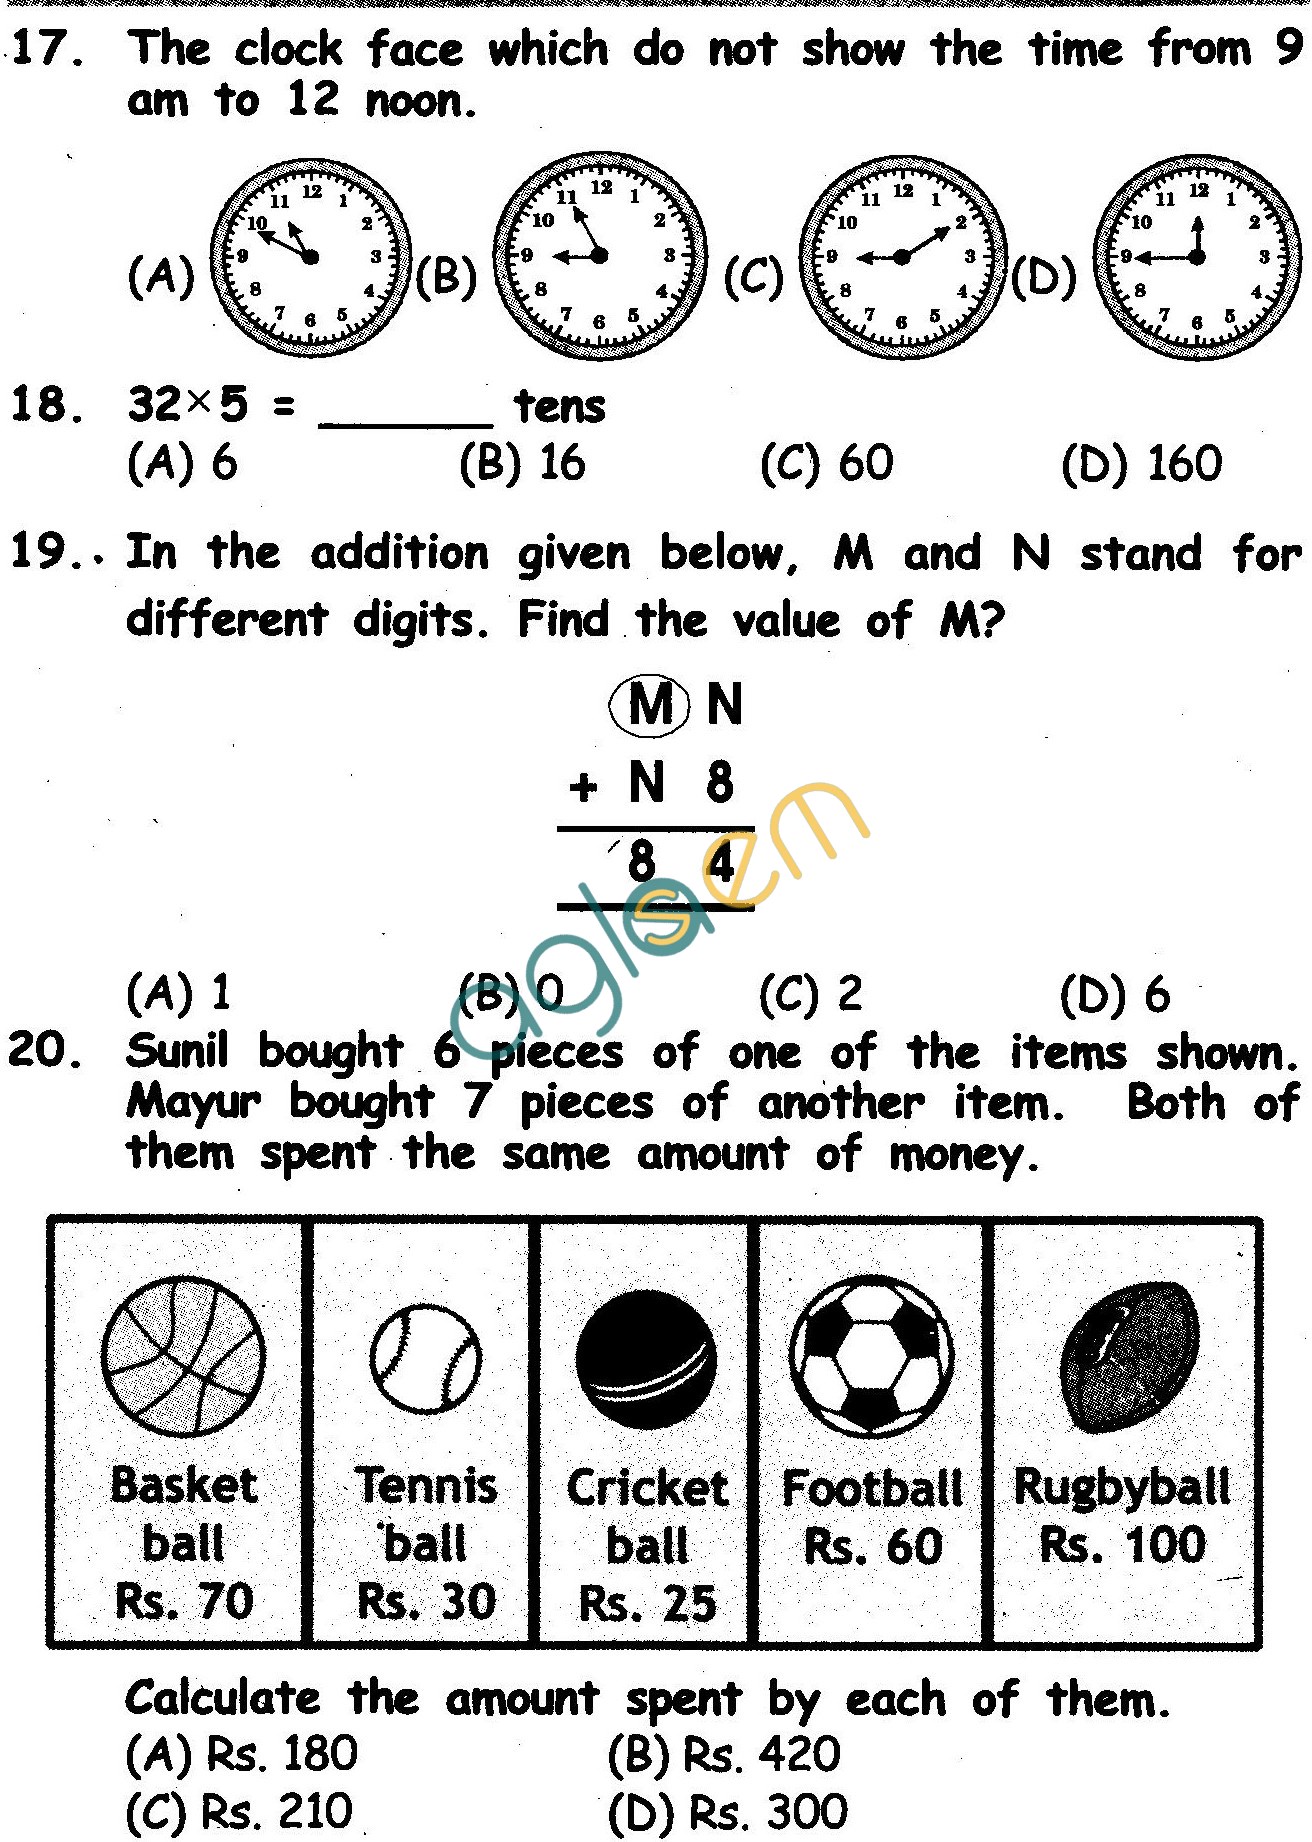 NSTSE 2011 Class II Question Paper with Answers - Mathematics